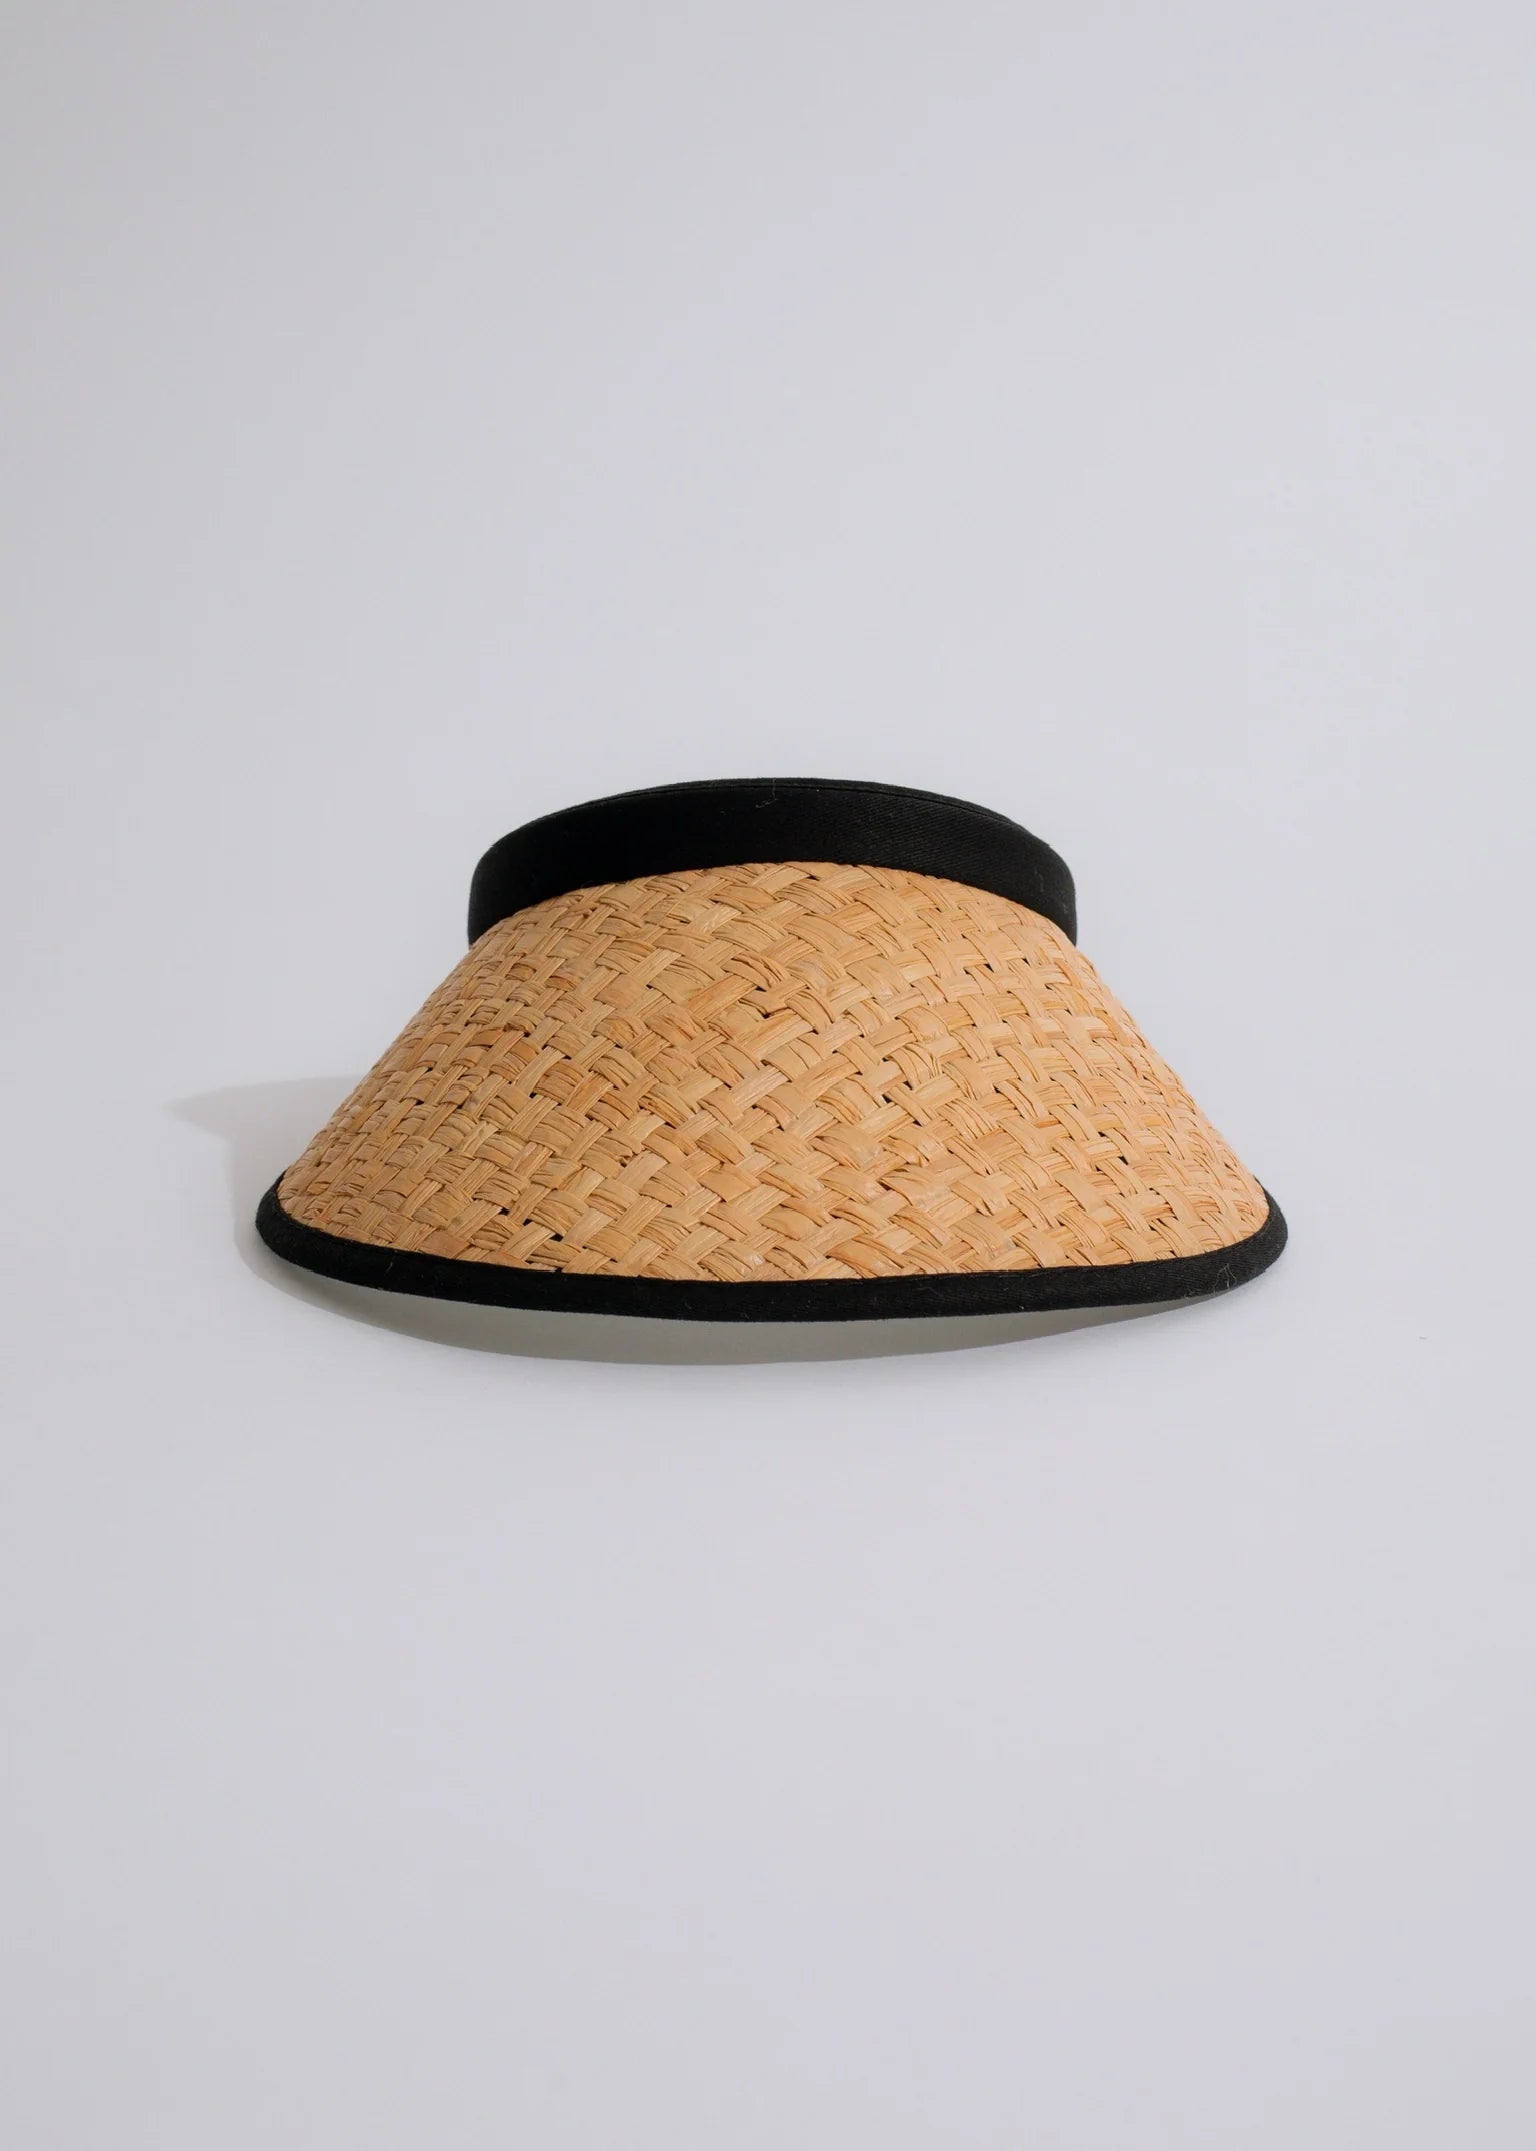 Natural Straw Woven Visor Hat Piped With Black Cotton 